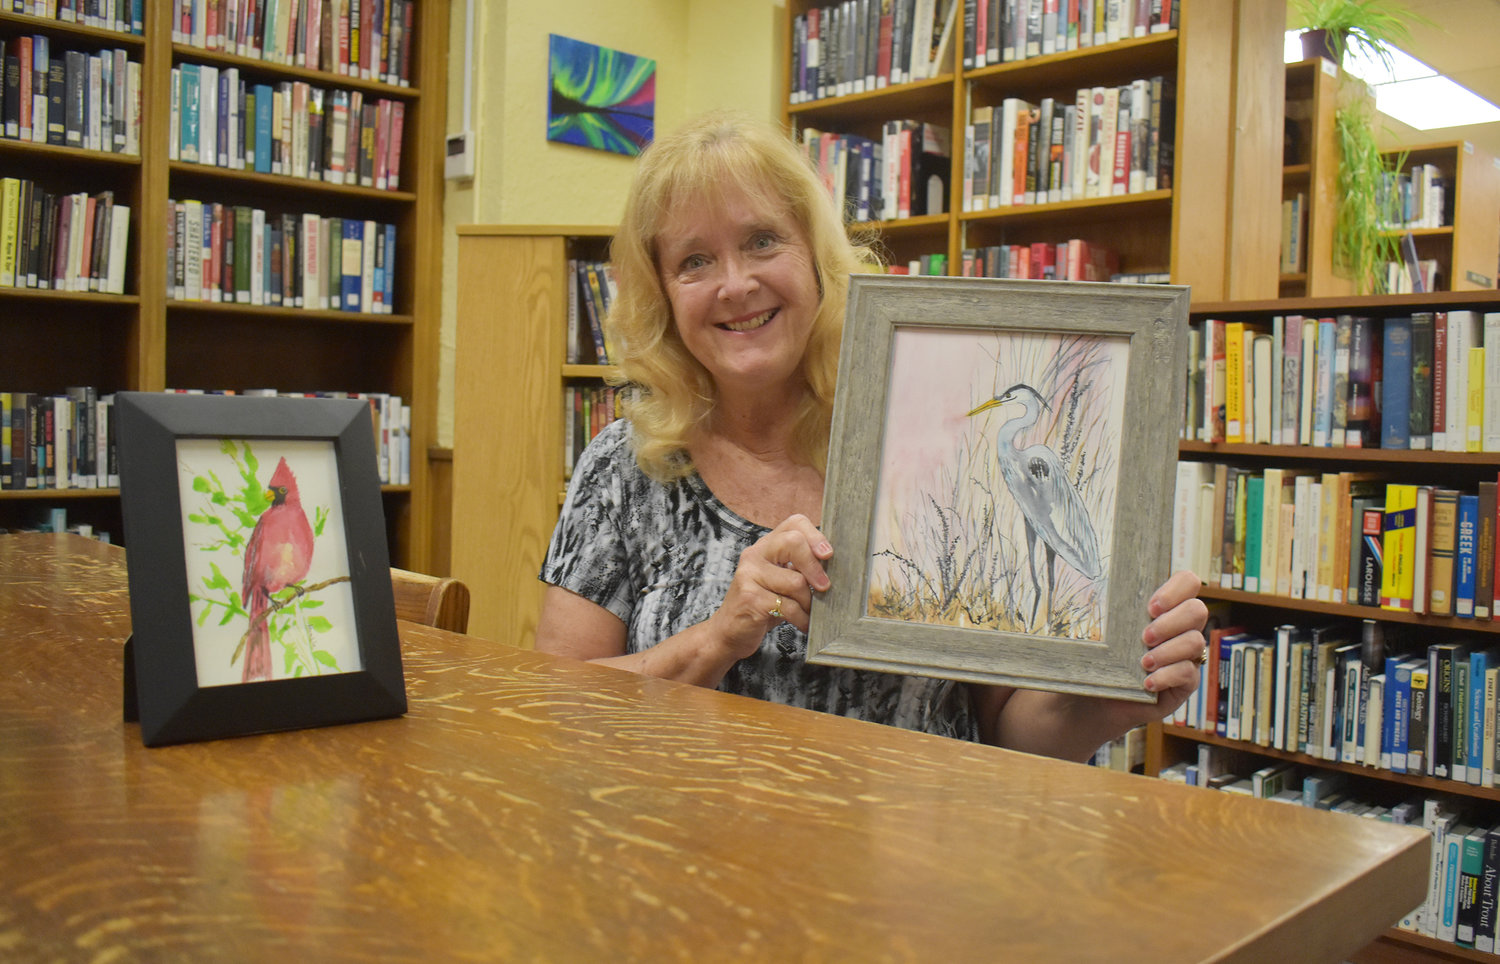 Jamestown resident Cindy Humble turned to painting to cope with the death of her 30-year-old daughter and to help others struggling with the loss of a loved one.